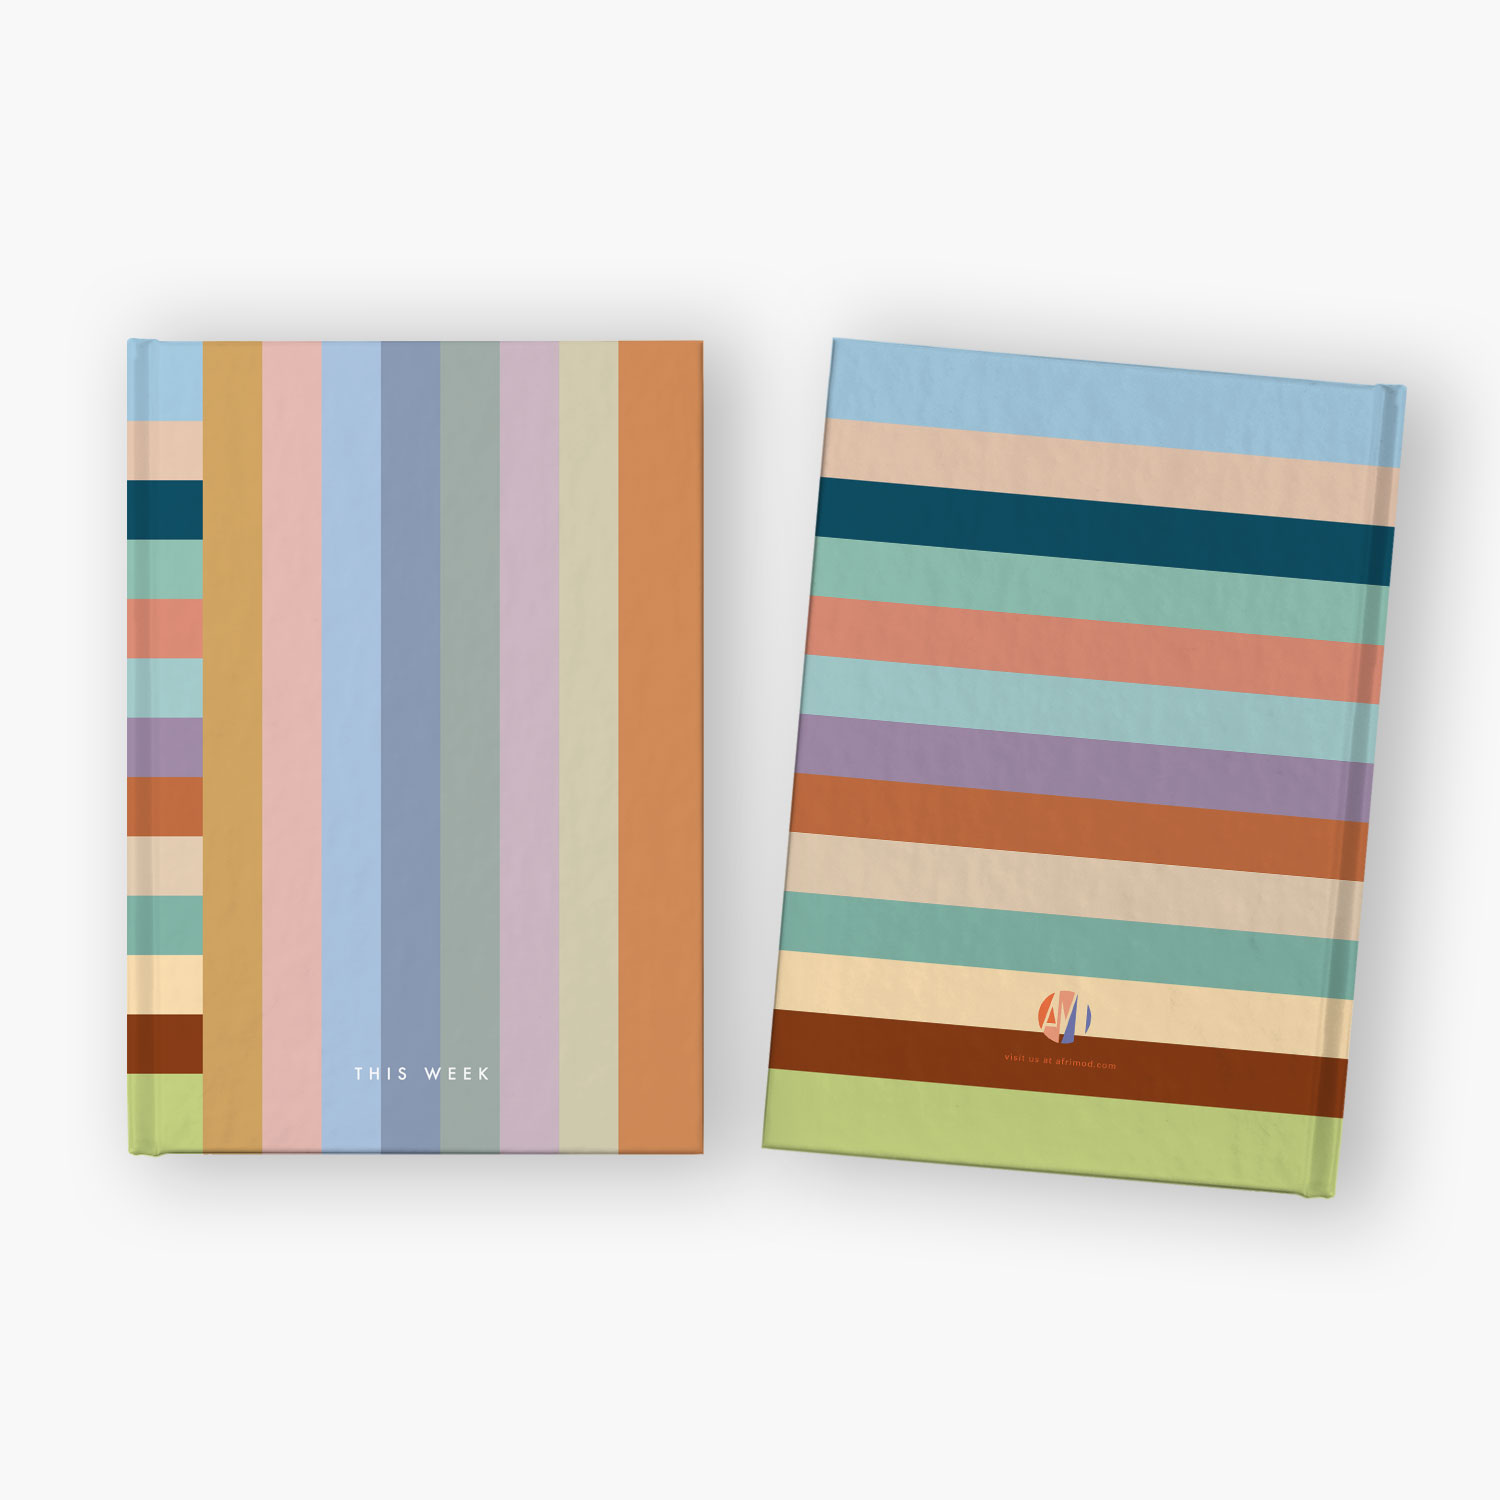 Undated Weekly Planner – earth-tone stripes